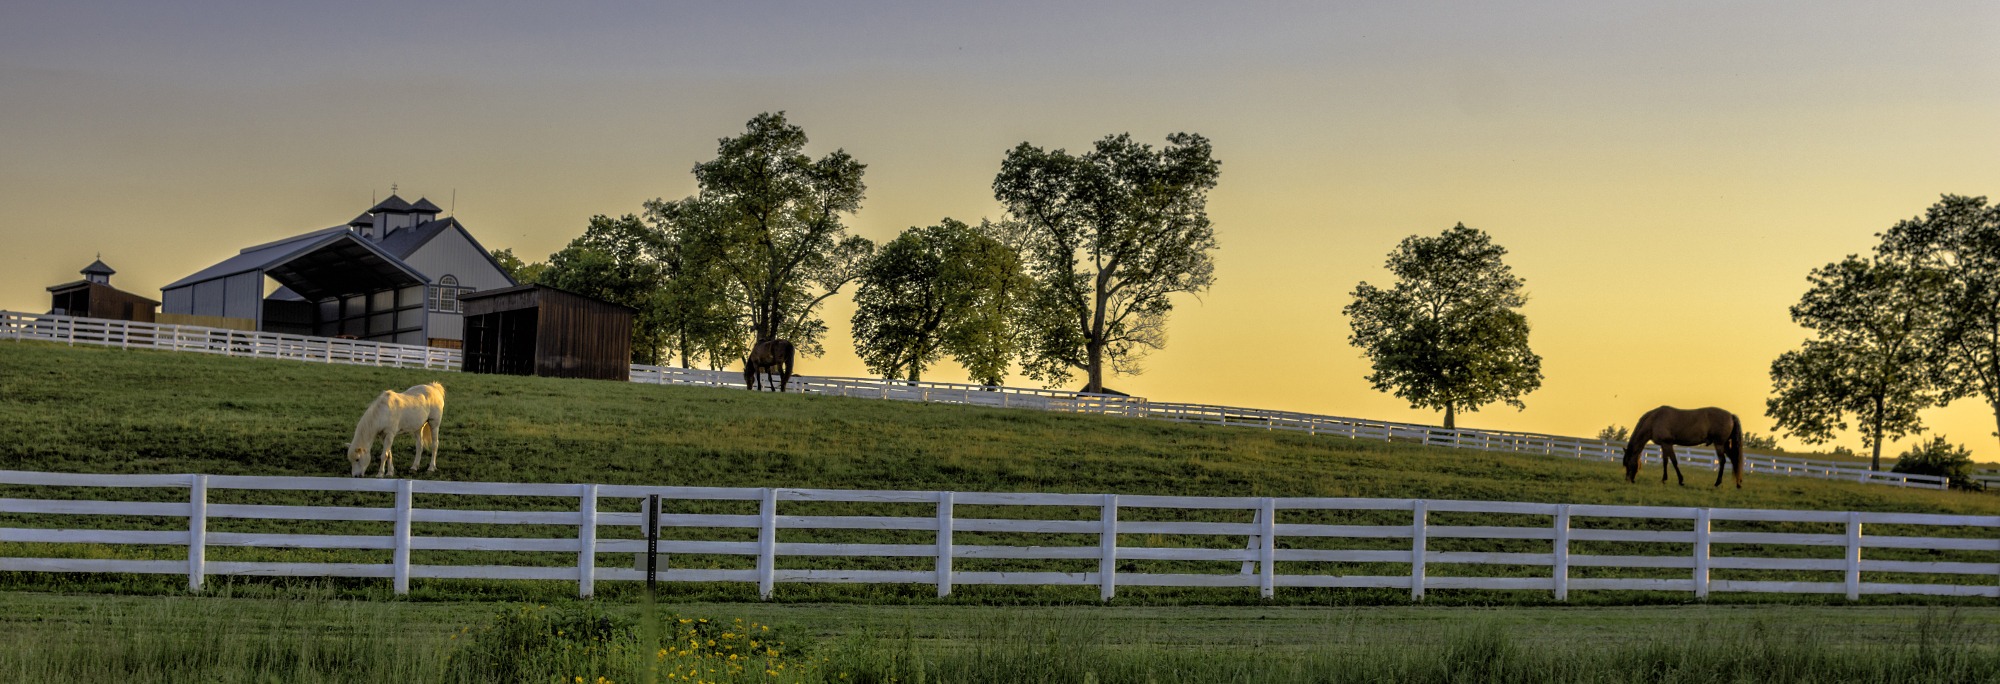 Horse Farm with Two Horses in a Pasture at Sunrise